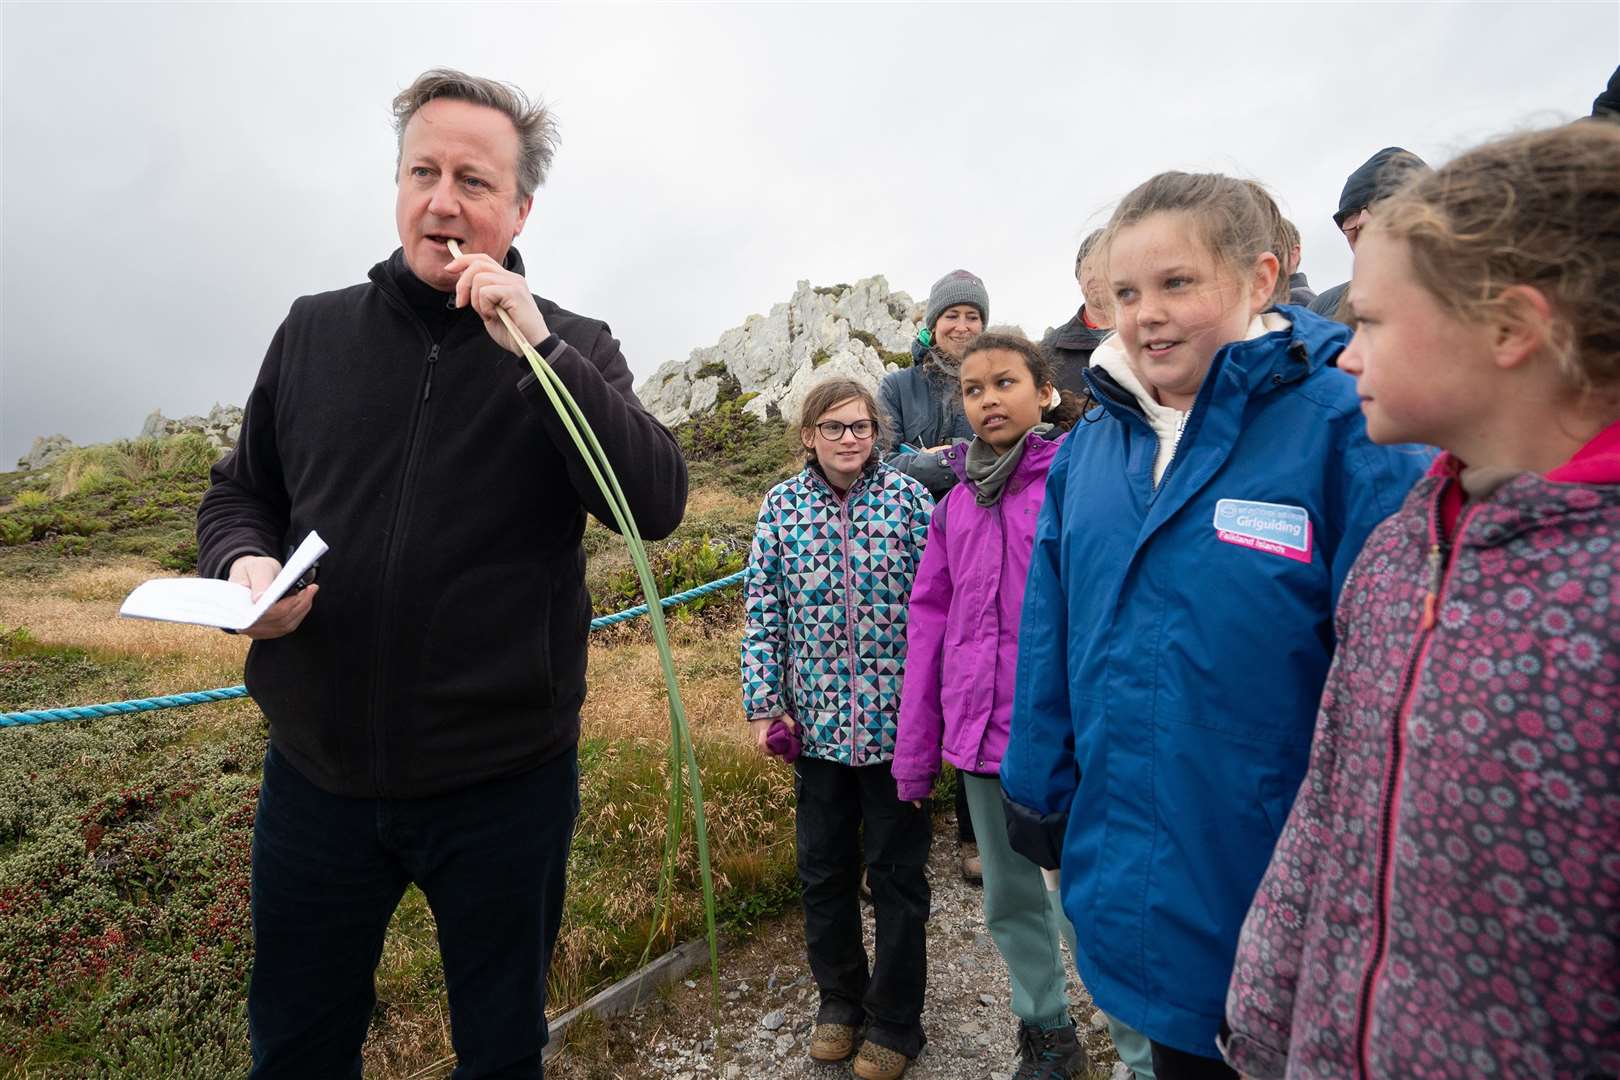 Lord Cameron tries eating some edible grass with local school children at Gypsy Cove (Stefan Rousseau/PA)